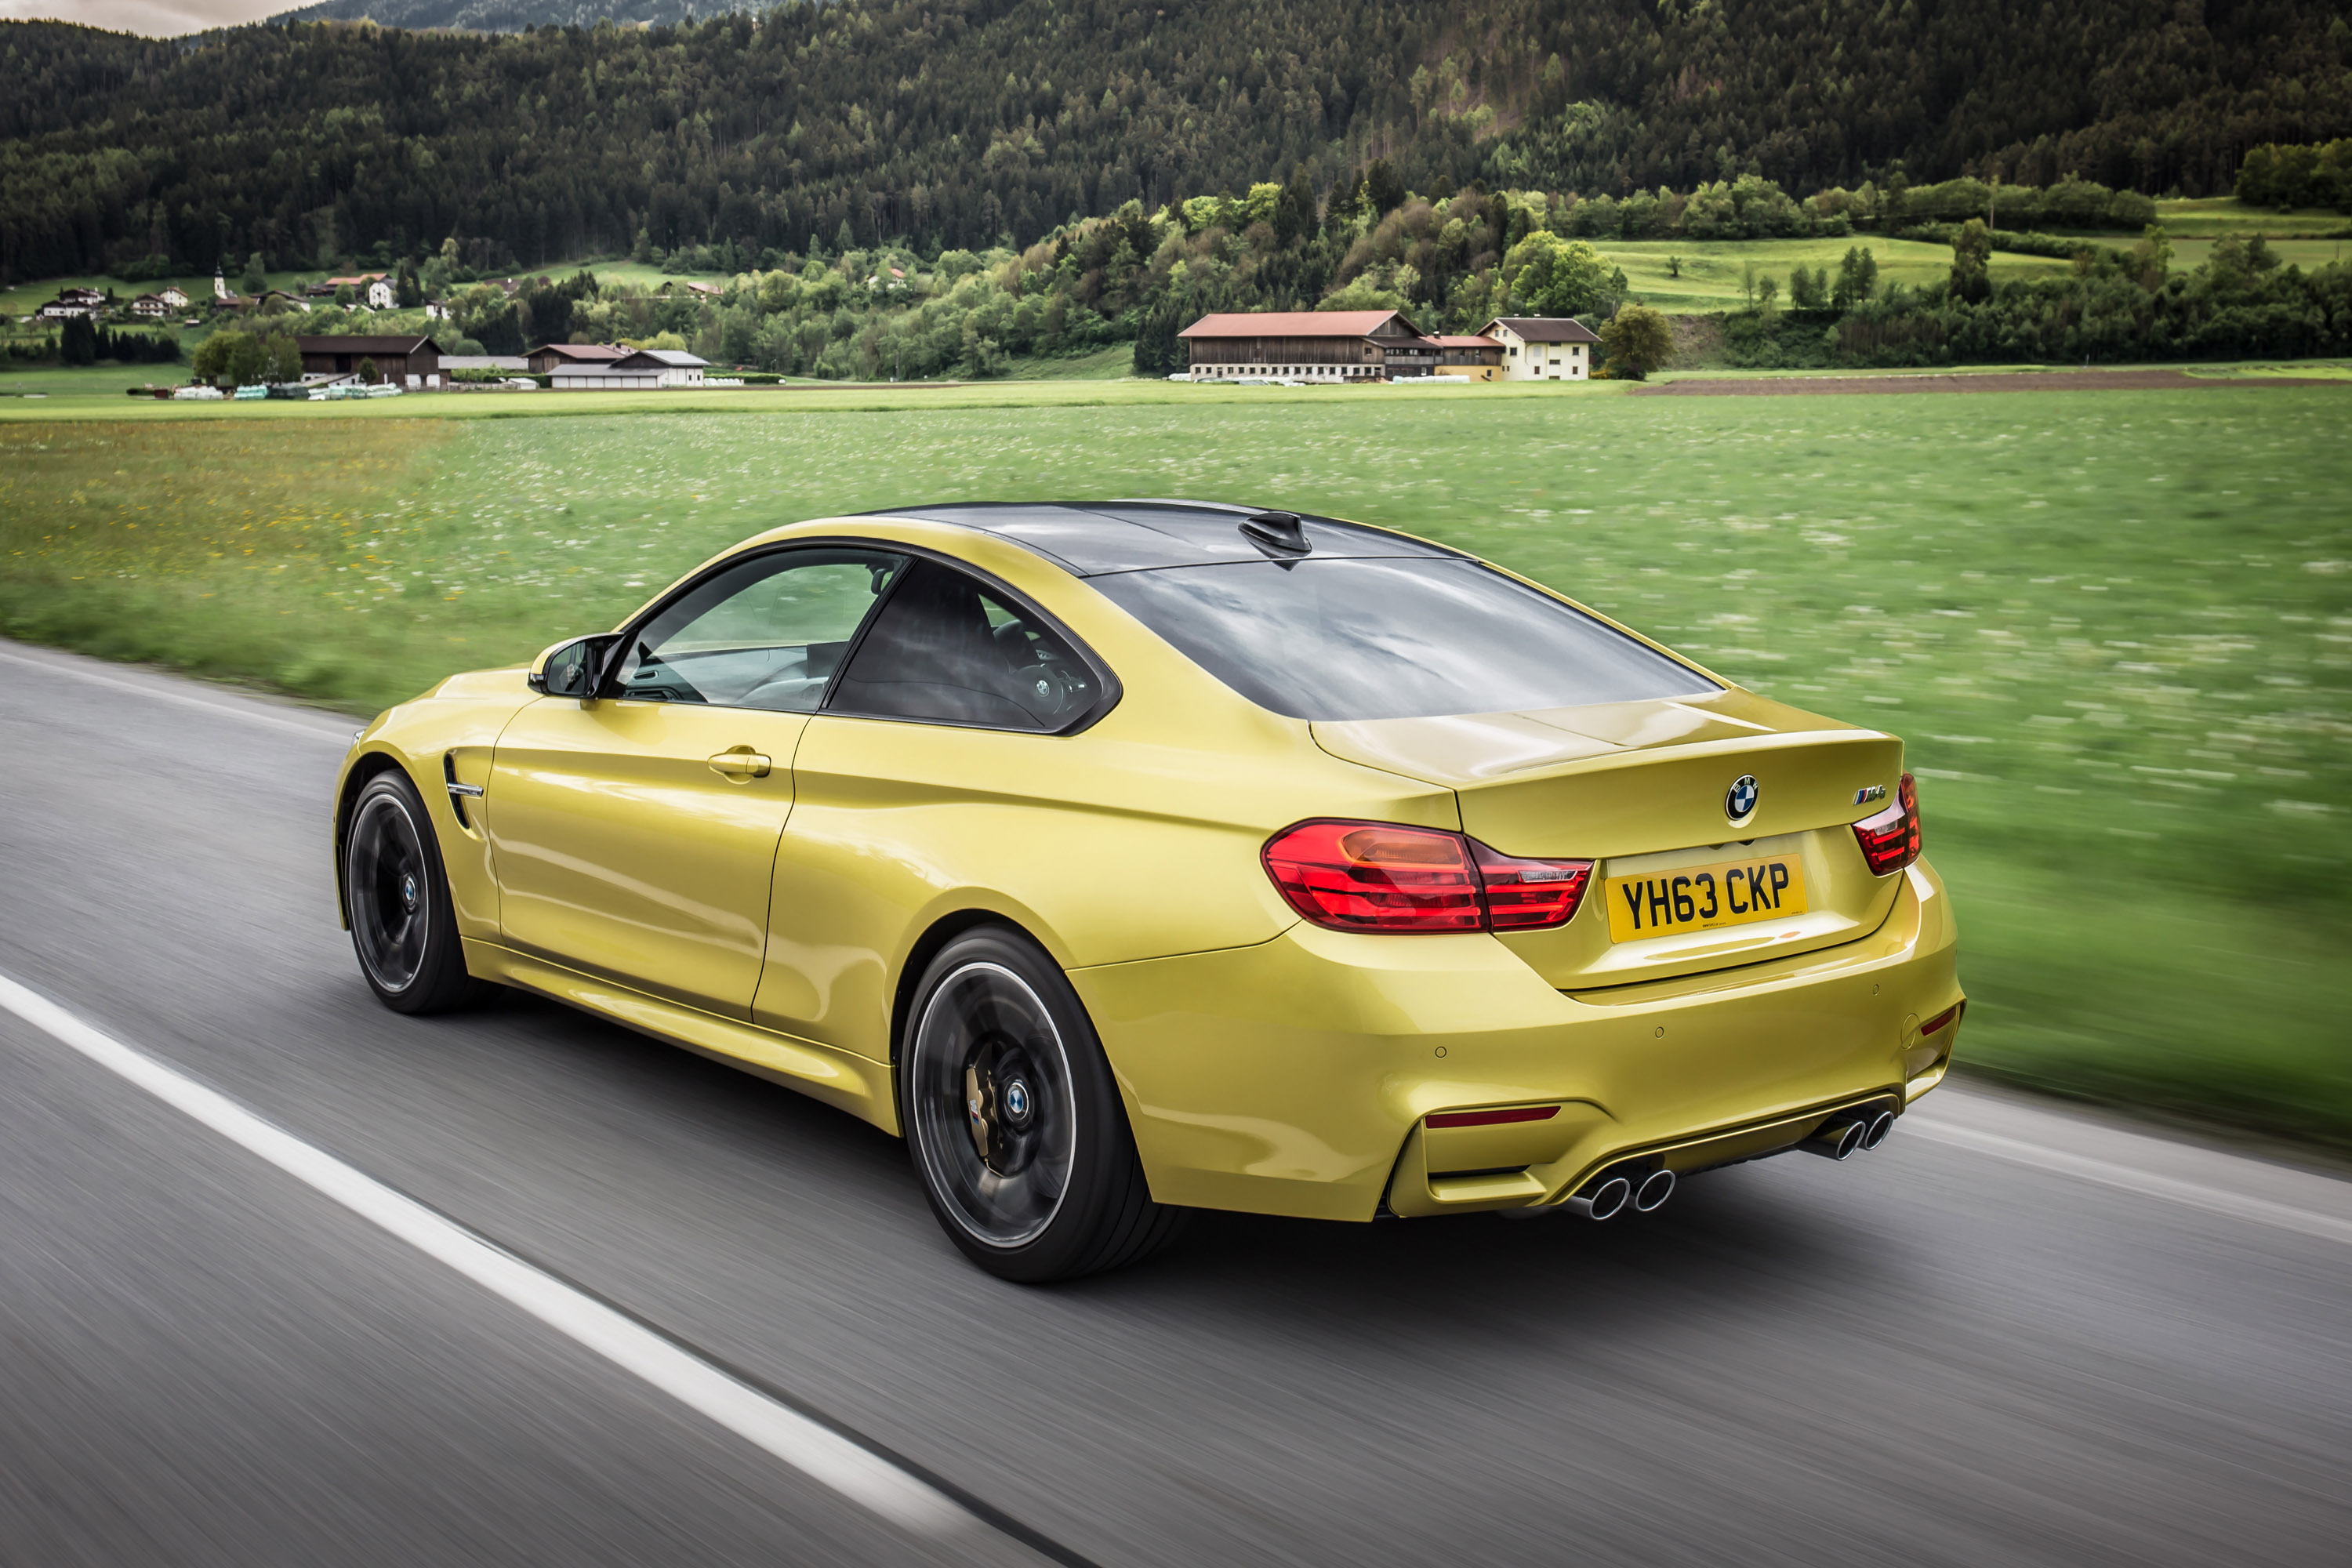 Bmw m4 coupe. BMW m4 купе. BMW m4 Coupe 2014. BMW m4 Coupe f82. BMW m4 Coupe 2010.